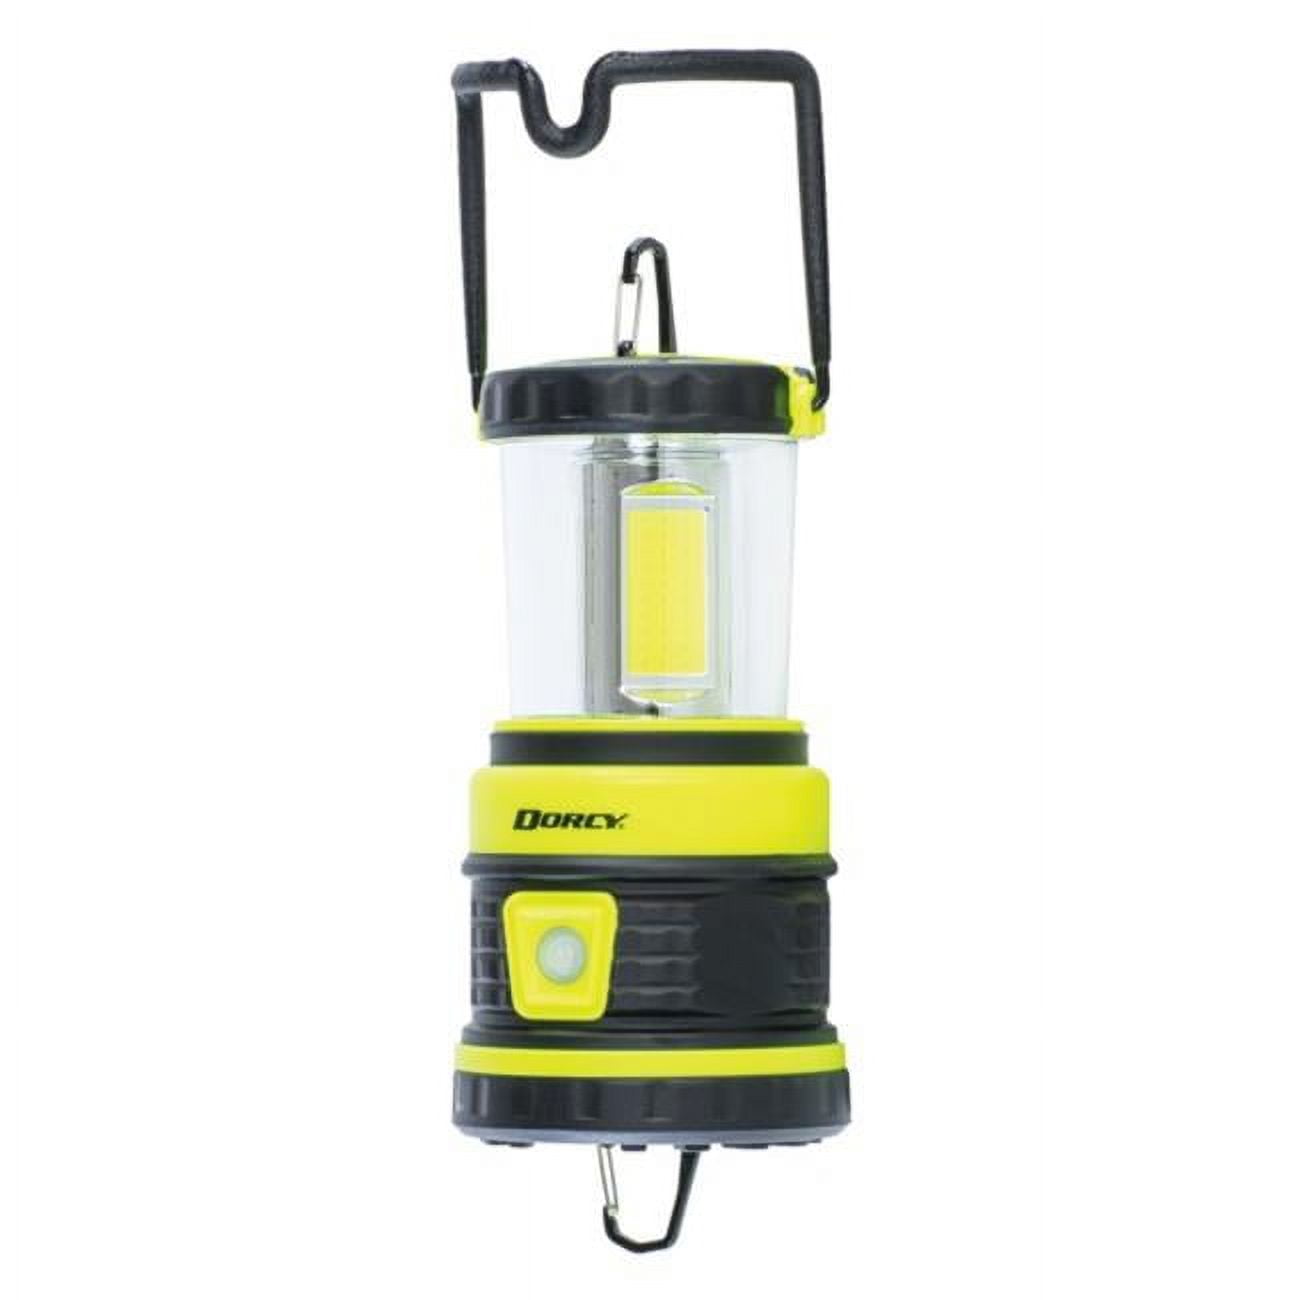 POWER VILLA LED Camping Lantern, COB Battery Lantern 4D Batteries Powered  2500LM, Water Resistant Emergency Lantern for Power Outage, Hurri